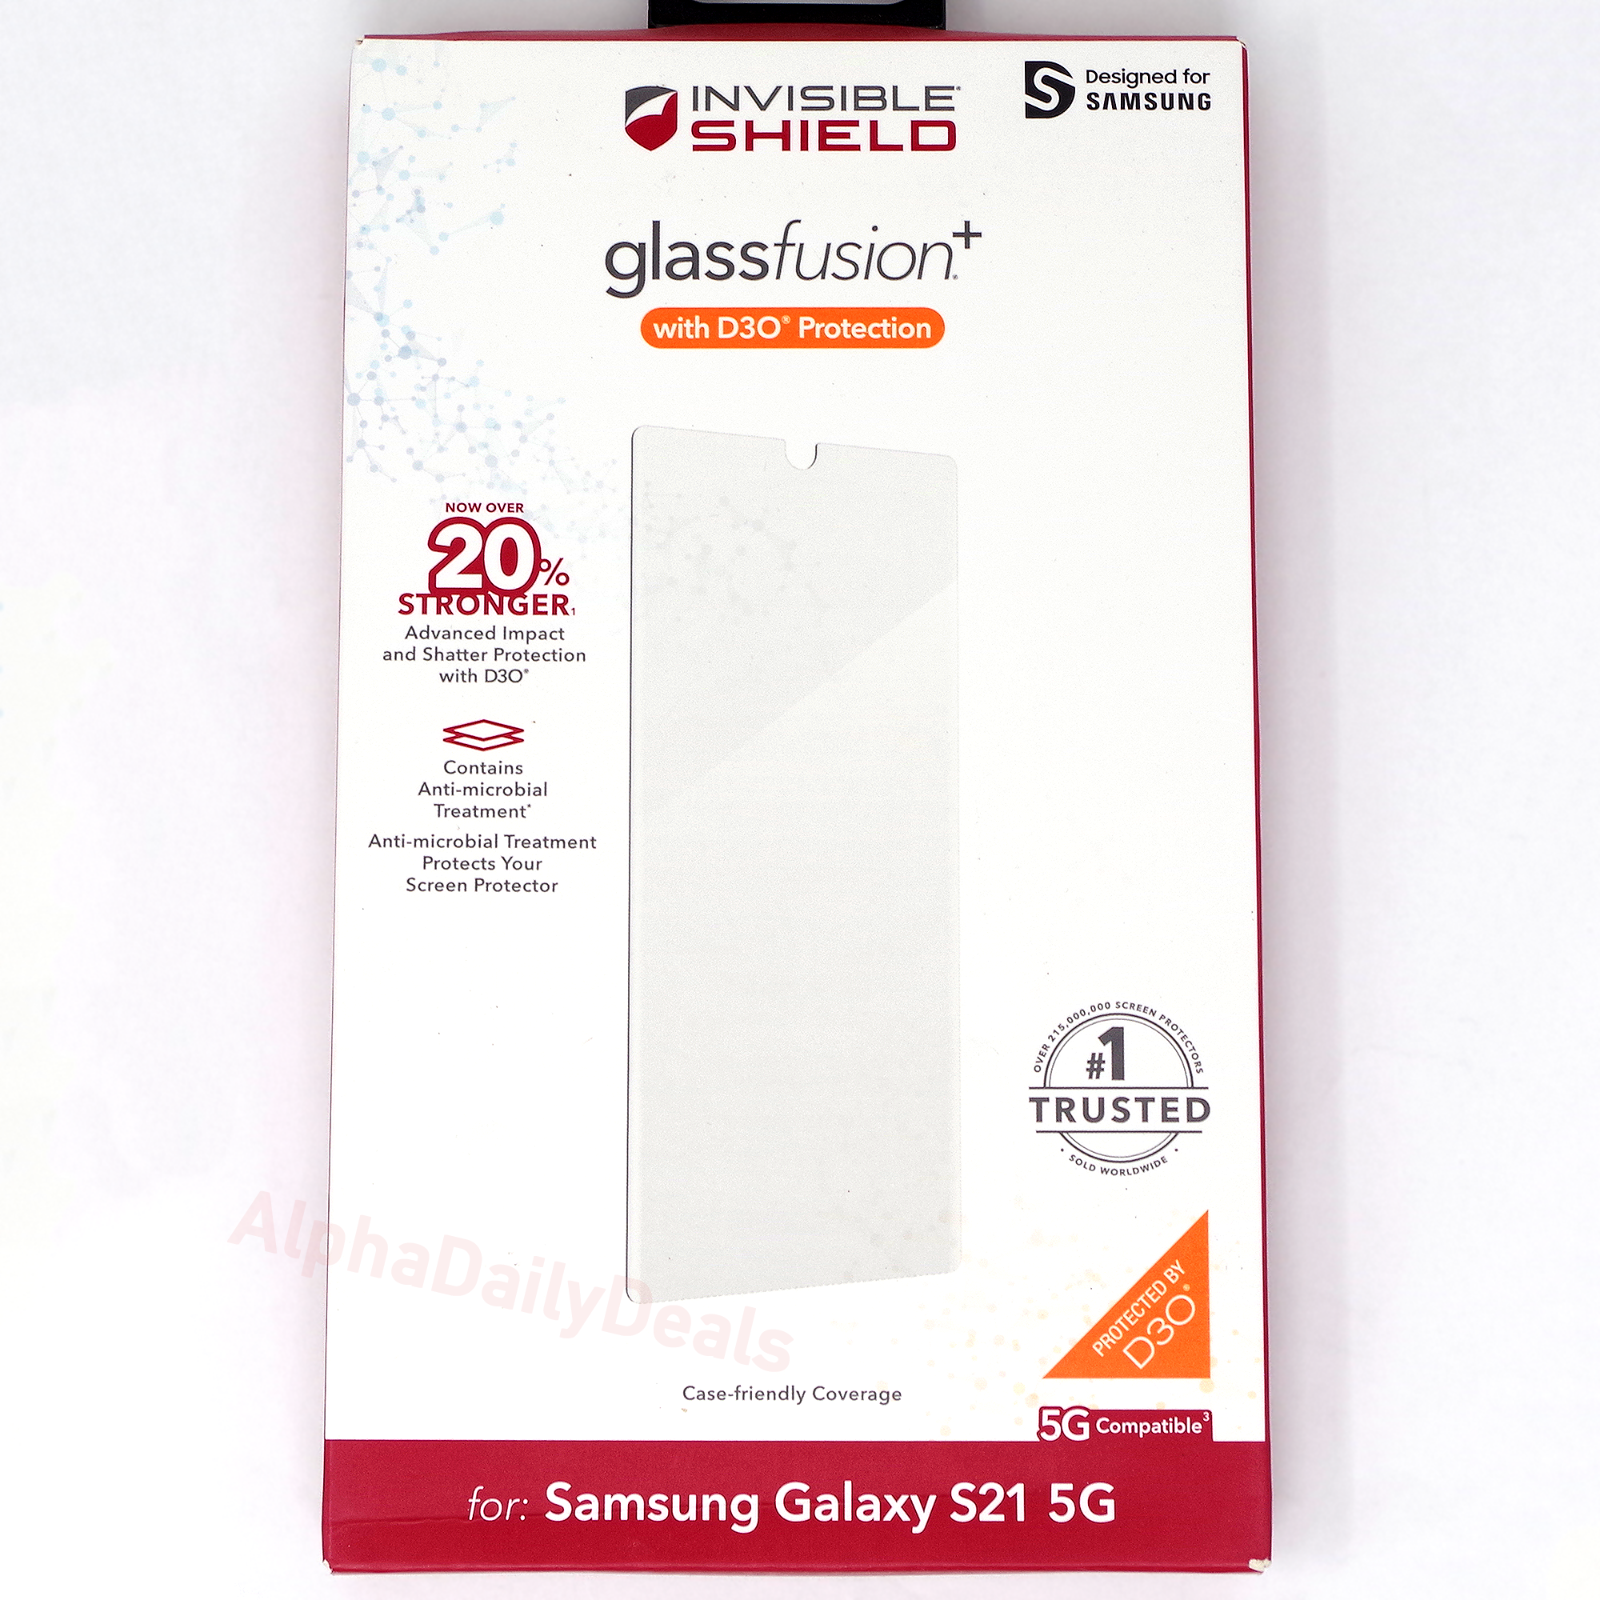 ZAGG Glass Fusion+ with D3O Screen Protector for Samsung Galaxy S21 5G